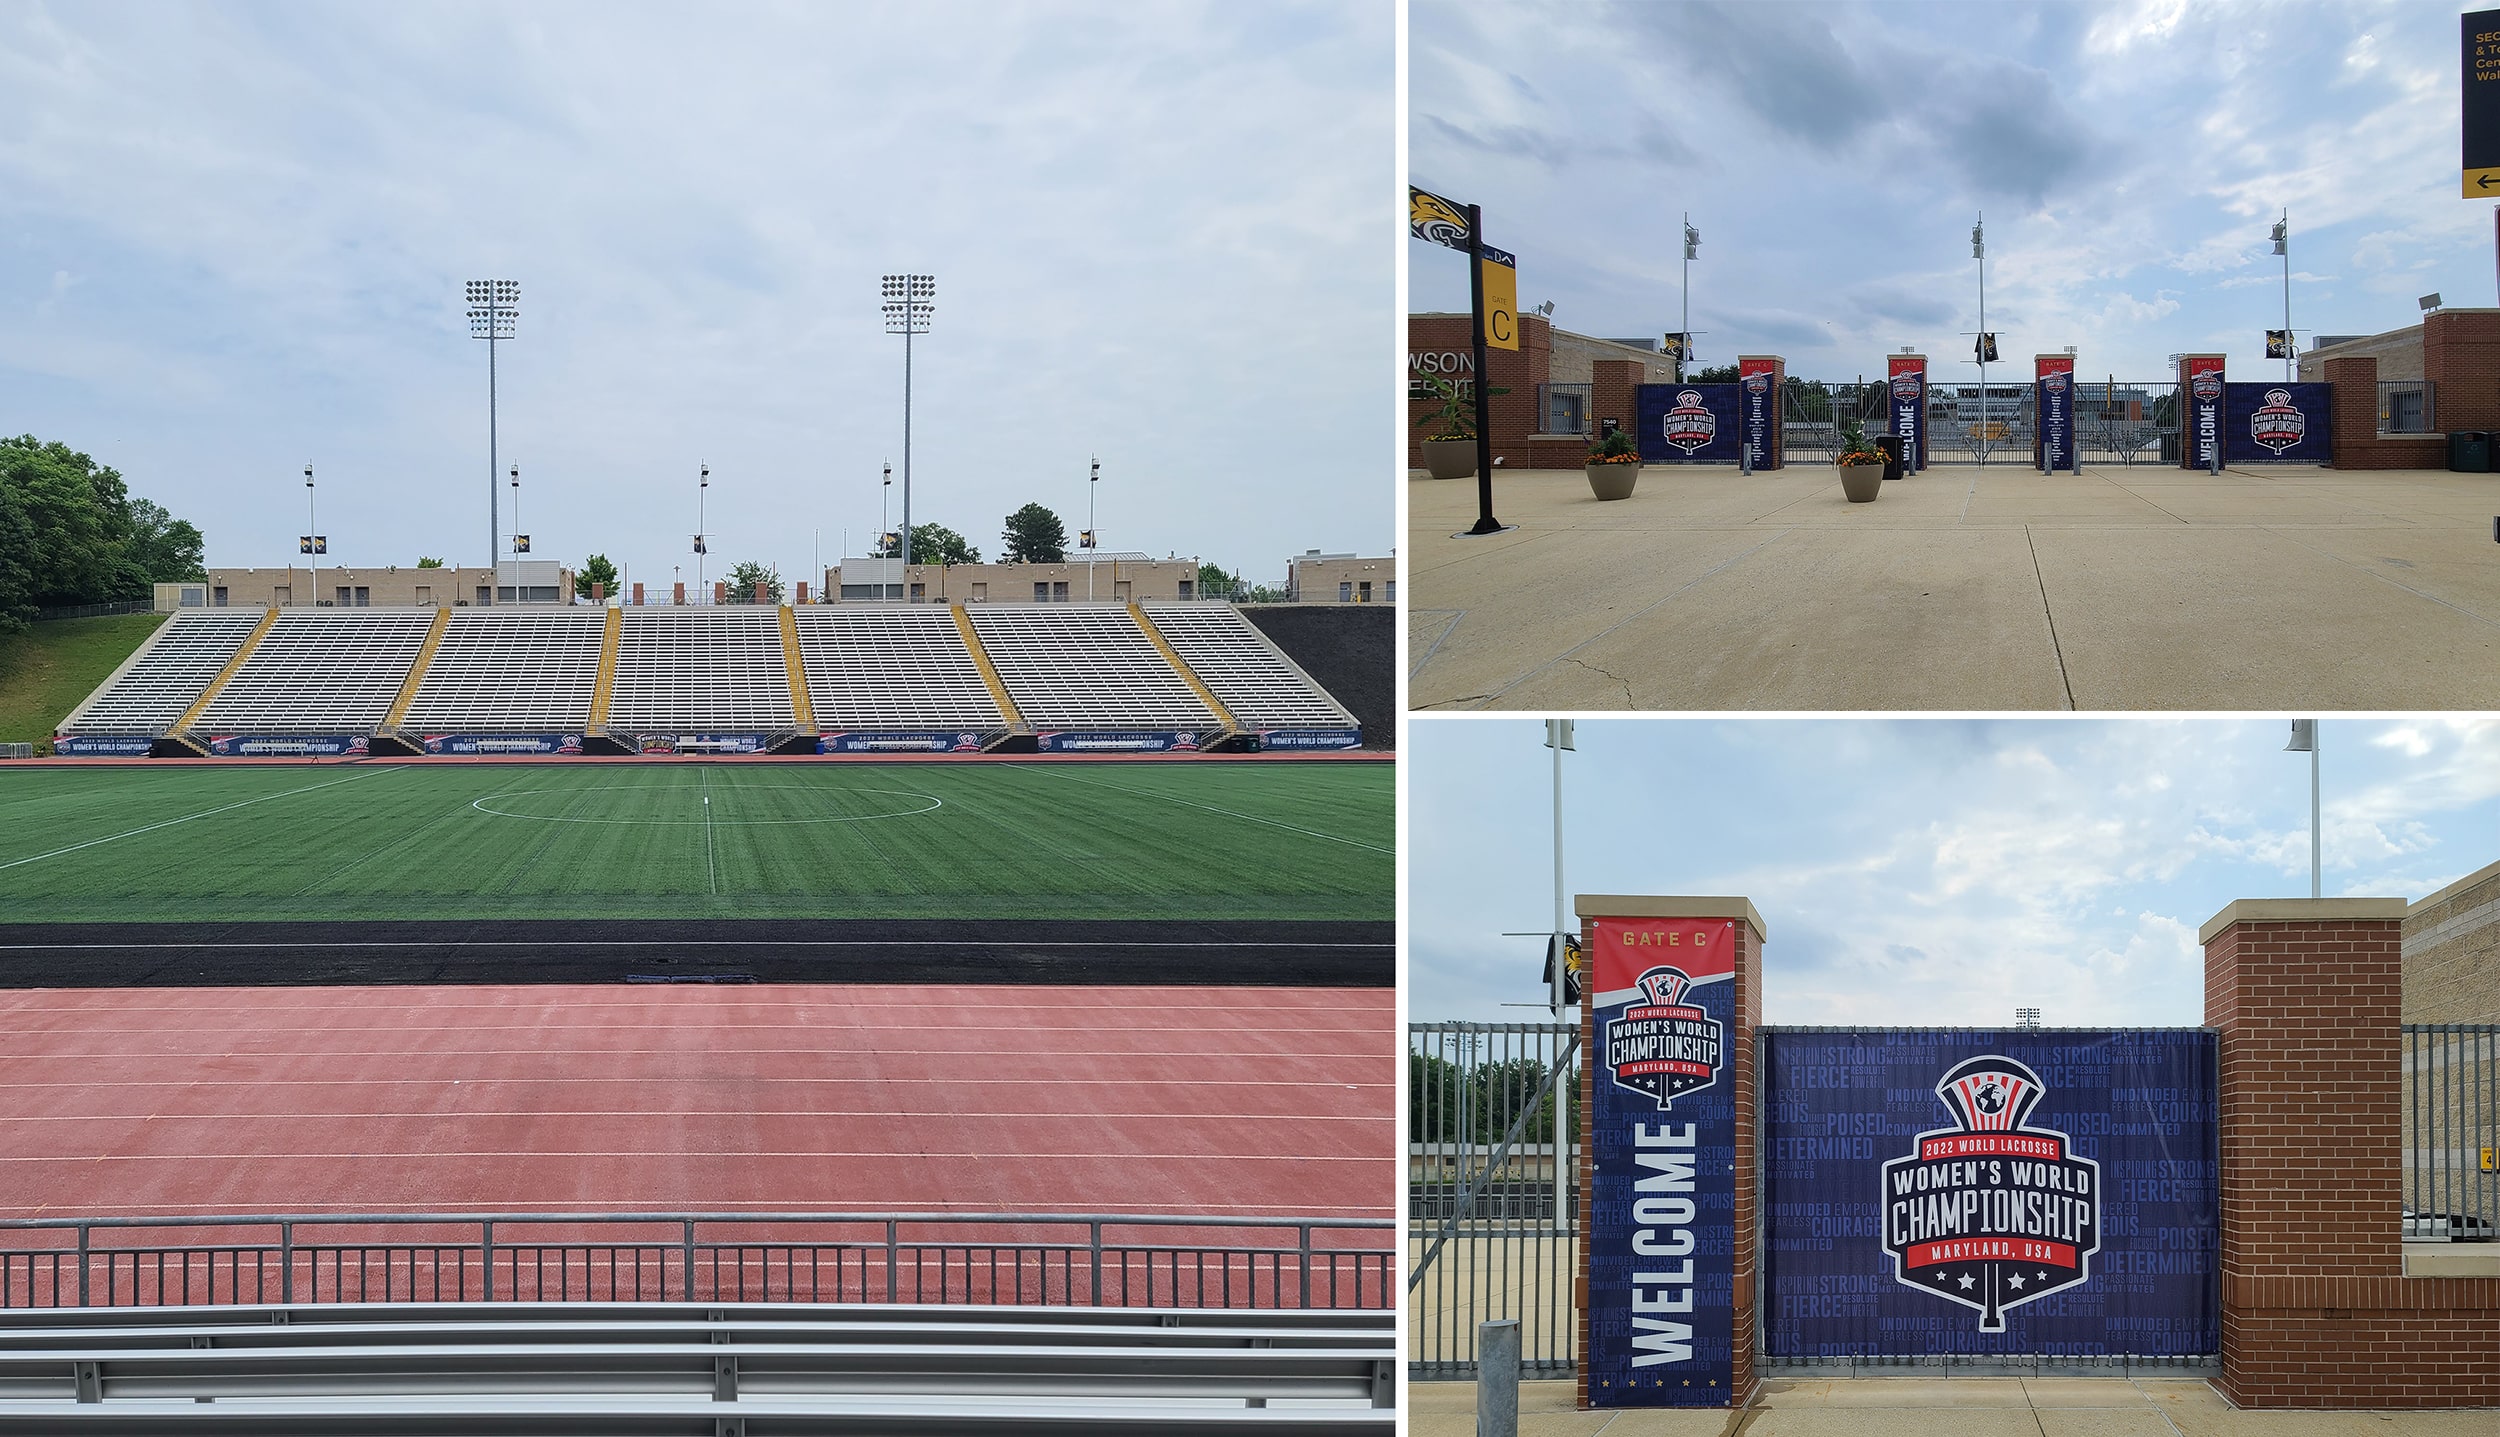 Towson's event spaces and sports fields got a makeover to play host to elite athletes from across the globe.